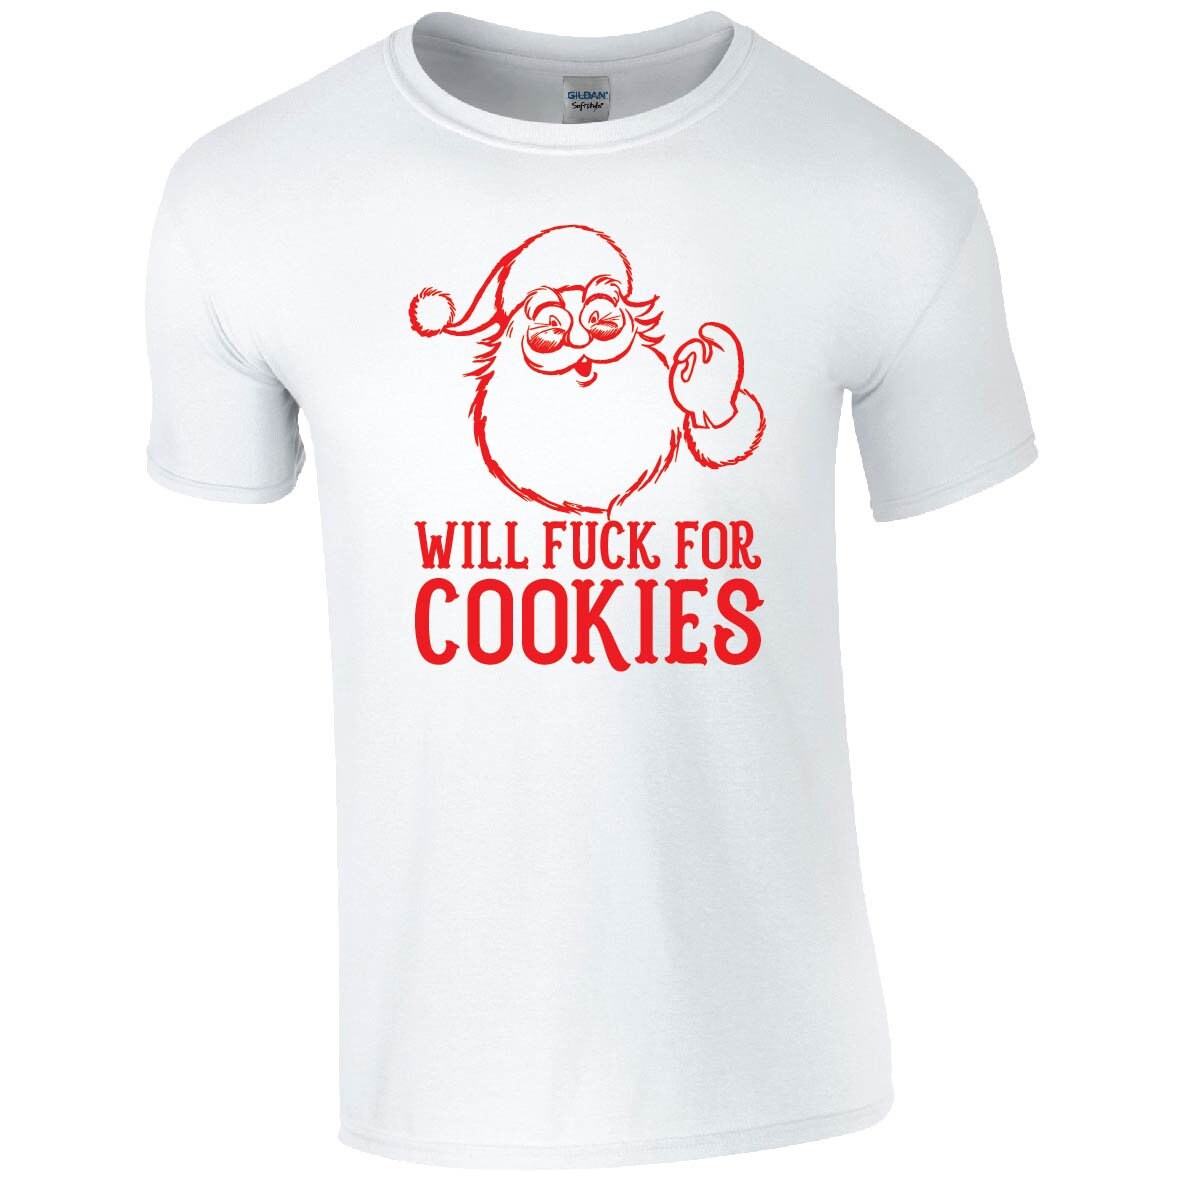 Will F*ck For Cookies T-Shirt, Rude, Funny Christmas, Santa Claus